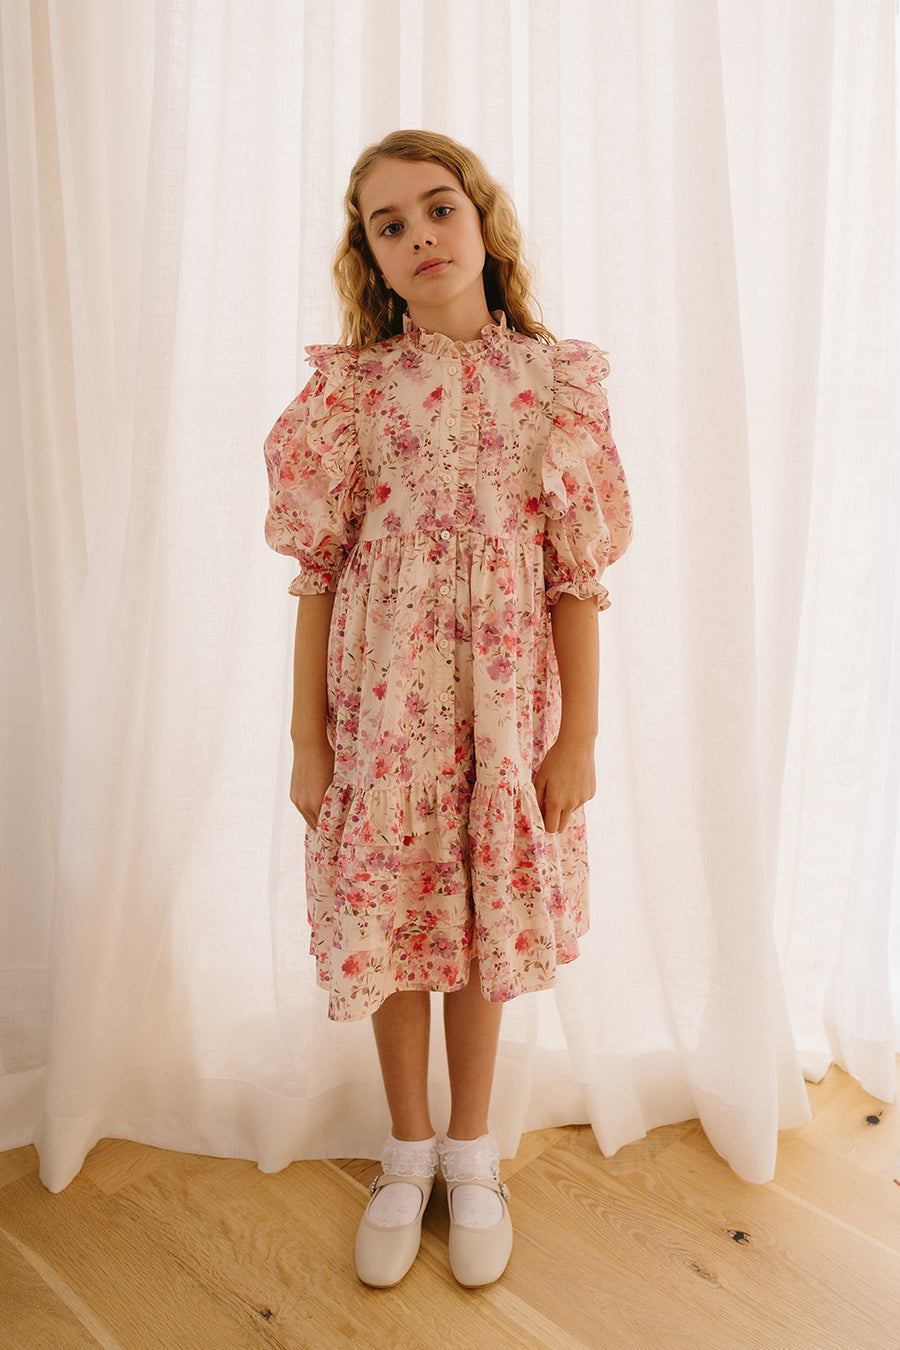 Scallop posie print voile dress by Petite Pink